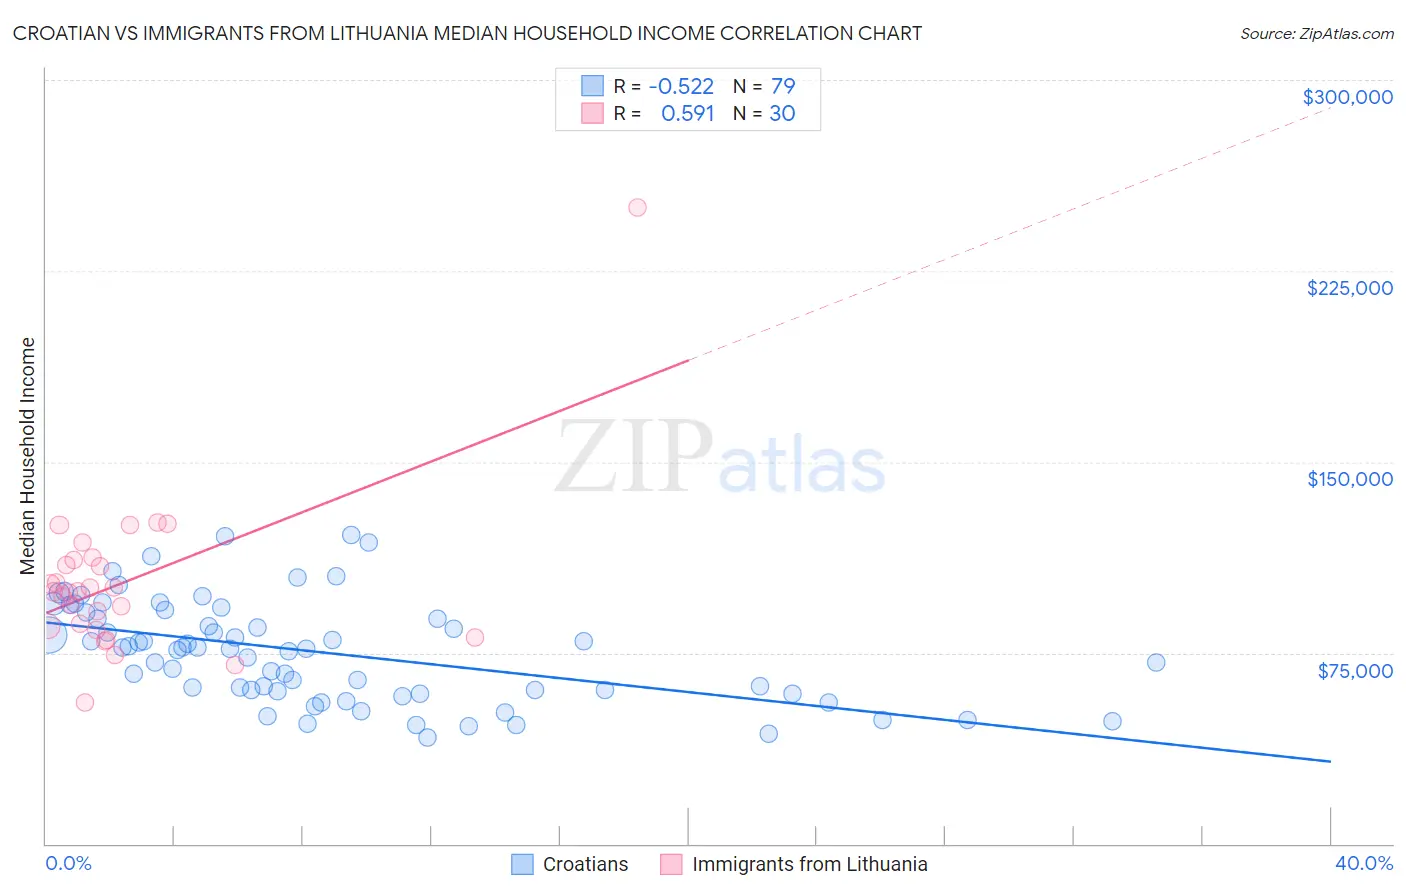 Croatian vs Immigrants from Lithuania Median Household Income